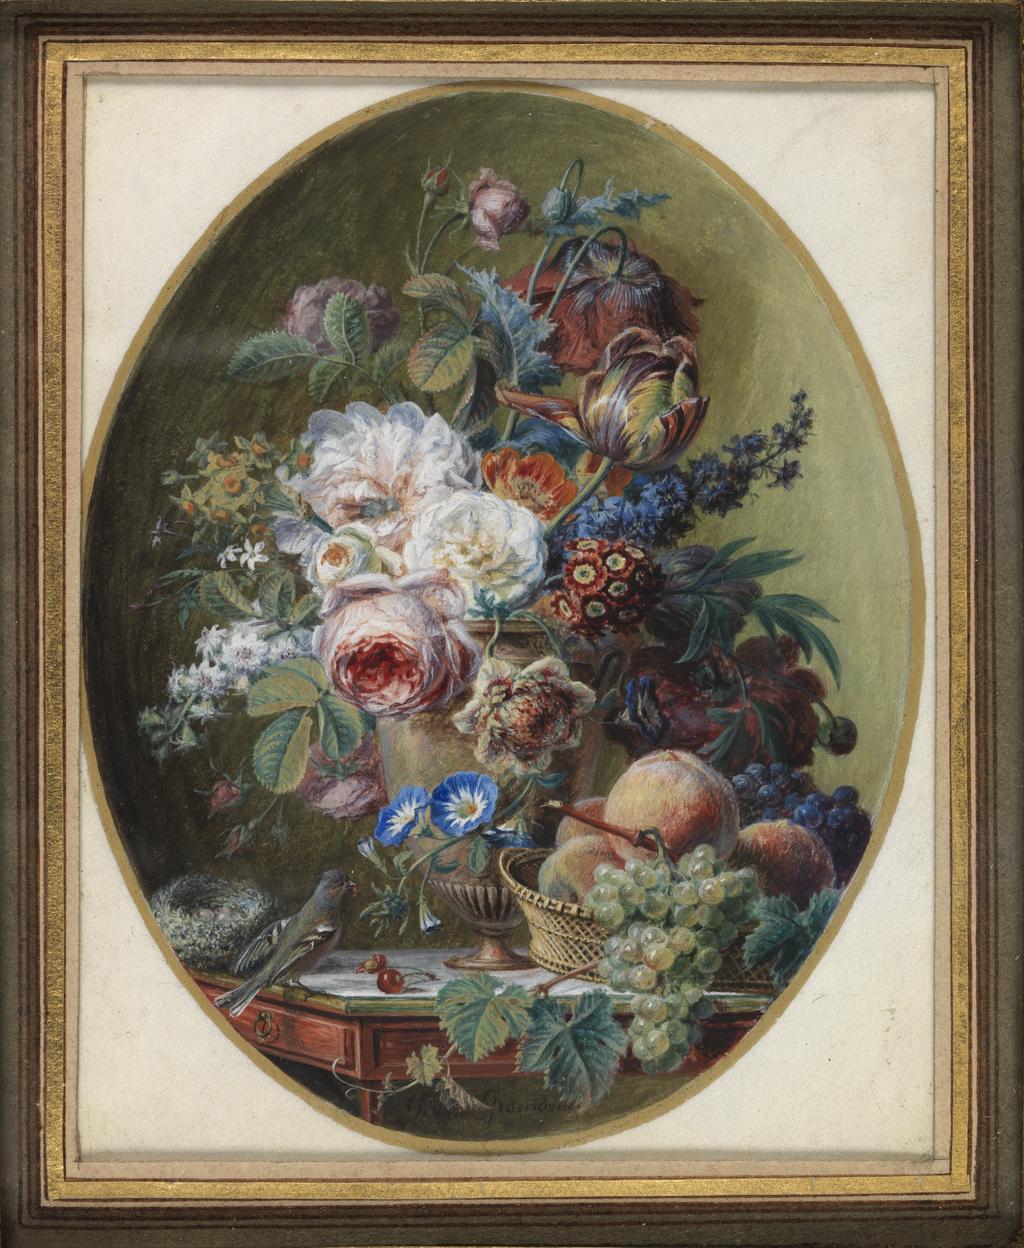 An image of Miniature painting. A vase of roses, tulip, peony, auricula, delphinium, poppy, convolvulus & other flowers on a table with inset marble top, and a basket of peaches & grapes, a birds nest and a bird eating one of two cherries. Spaendonck, Gerard van (Dutch, 1746-1822). Gouache on card, height, sight size, 120 mm, width, sight size, 95 mm. Acquisition: bequeathed 1973 by Henry Rogers Broughton Fairhaven.